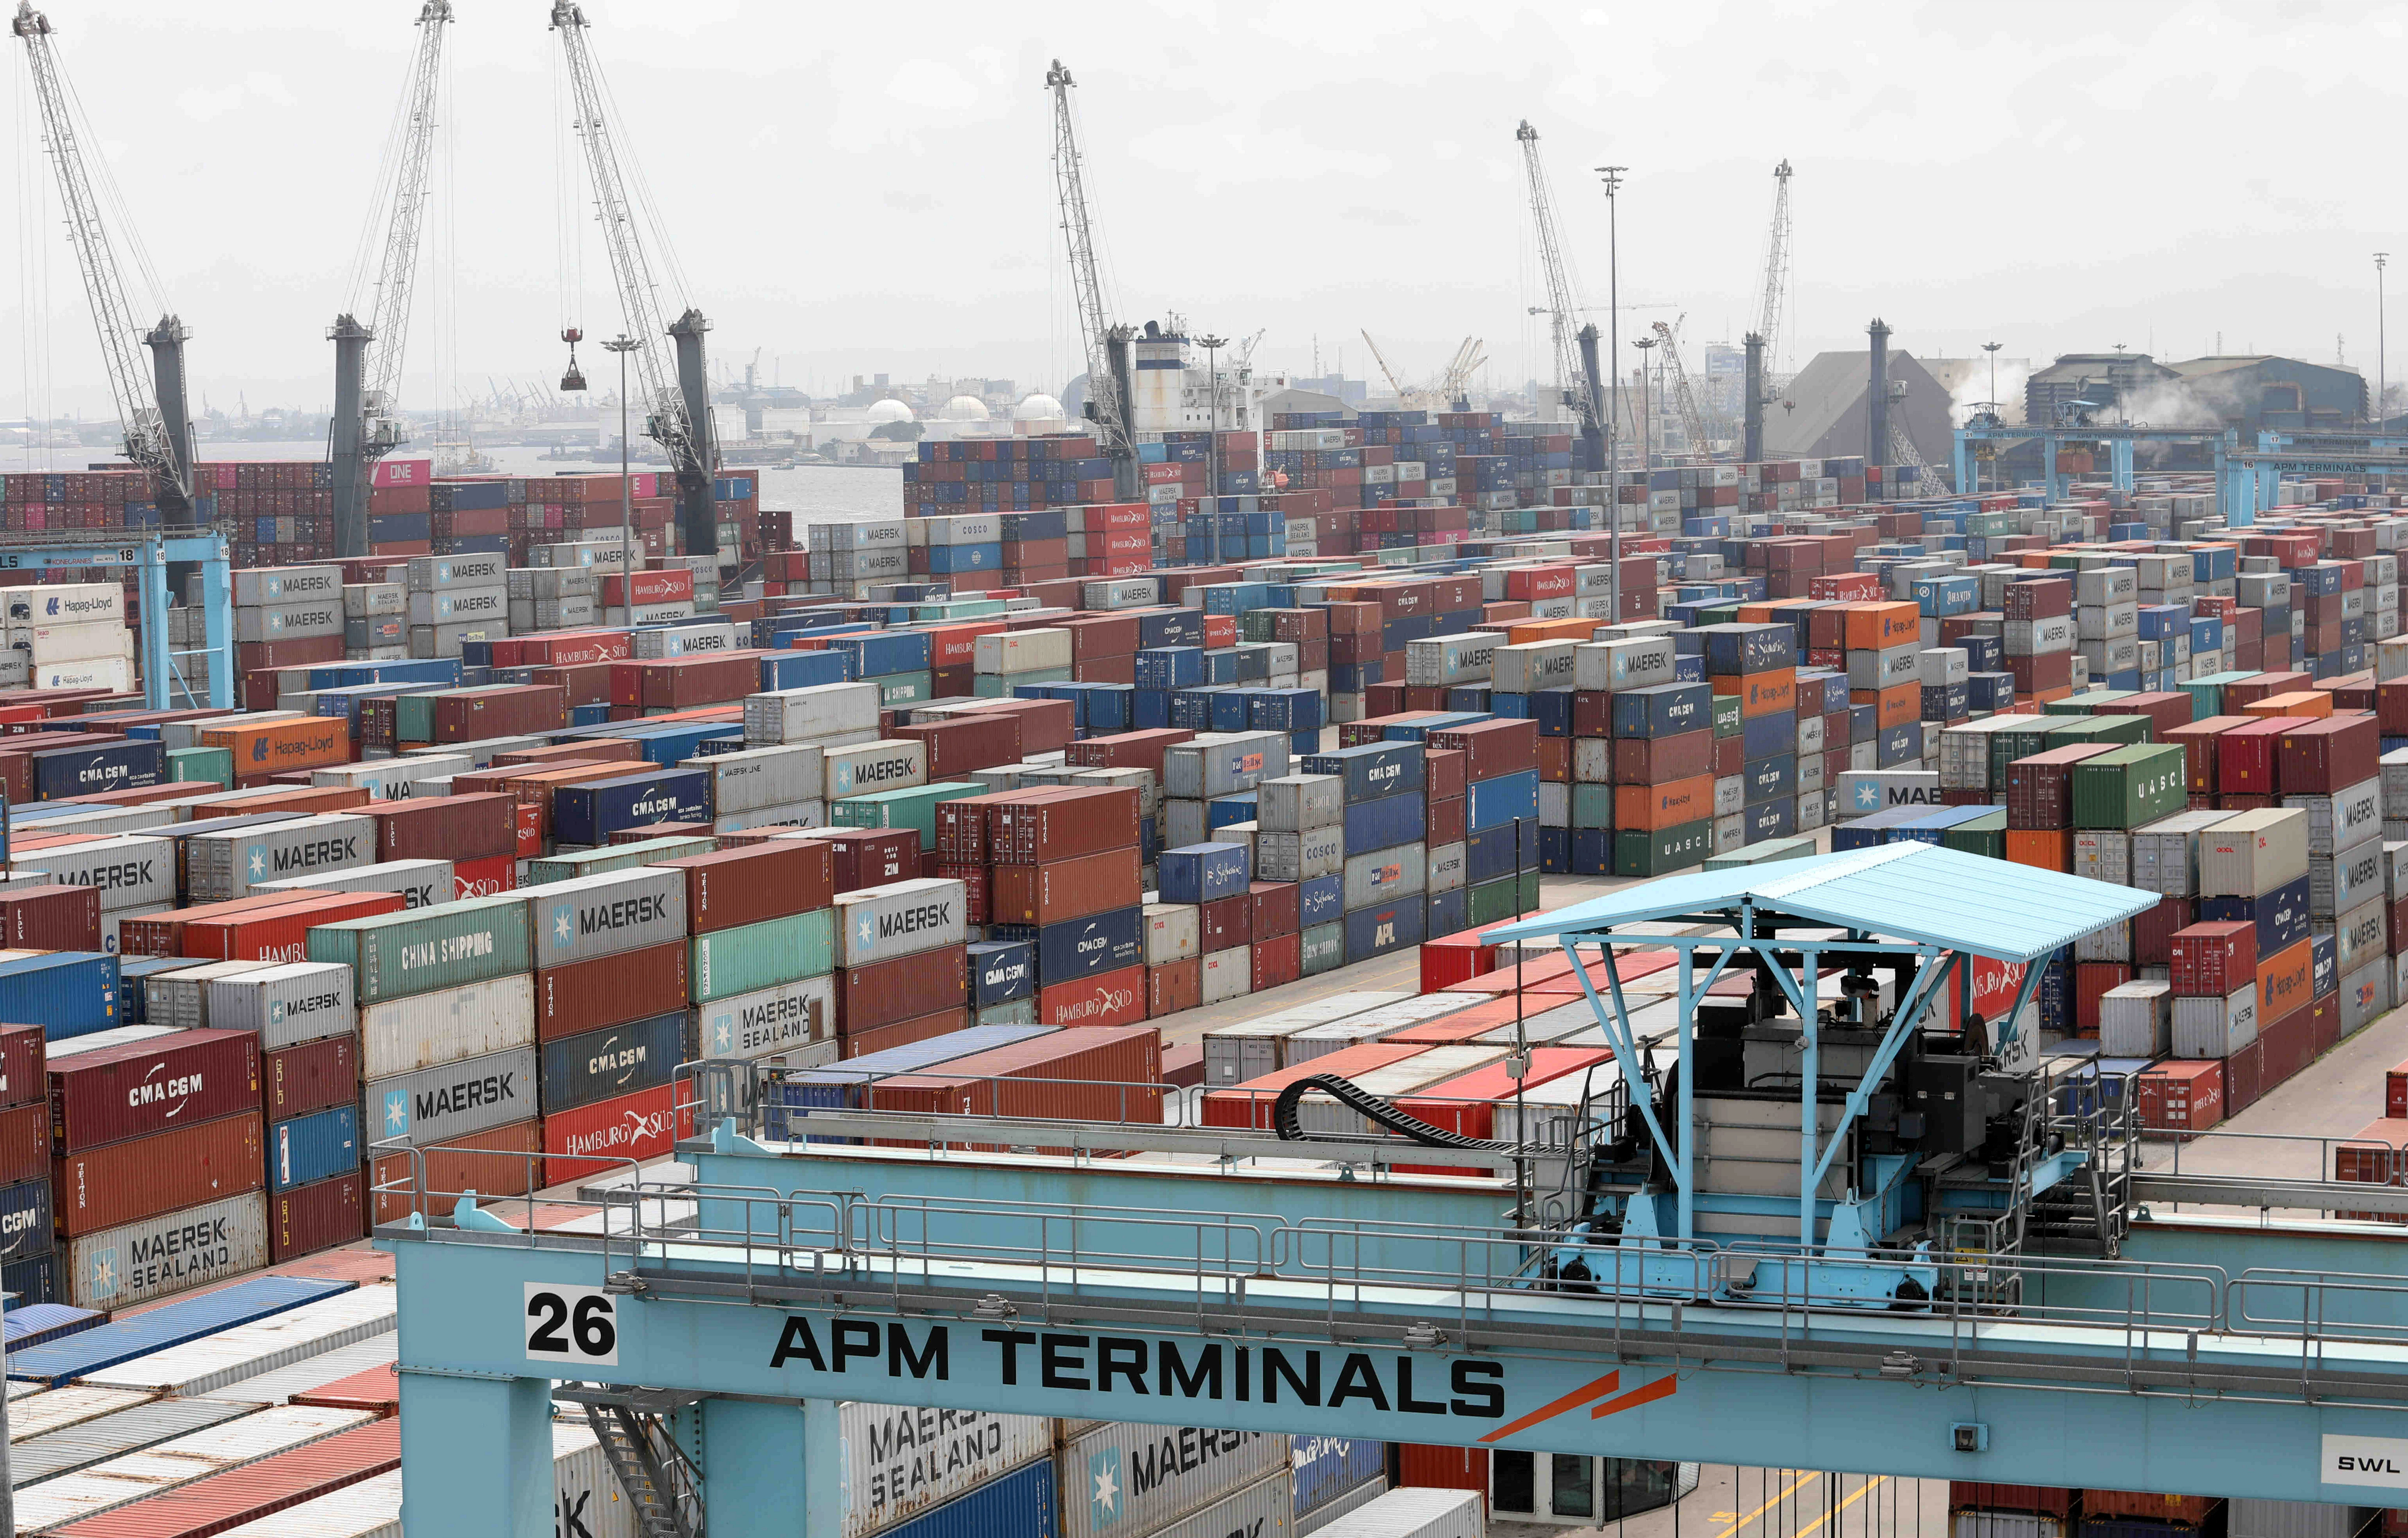 Cranes and containers seen at APM Terminals at the gateway port in Apapa